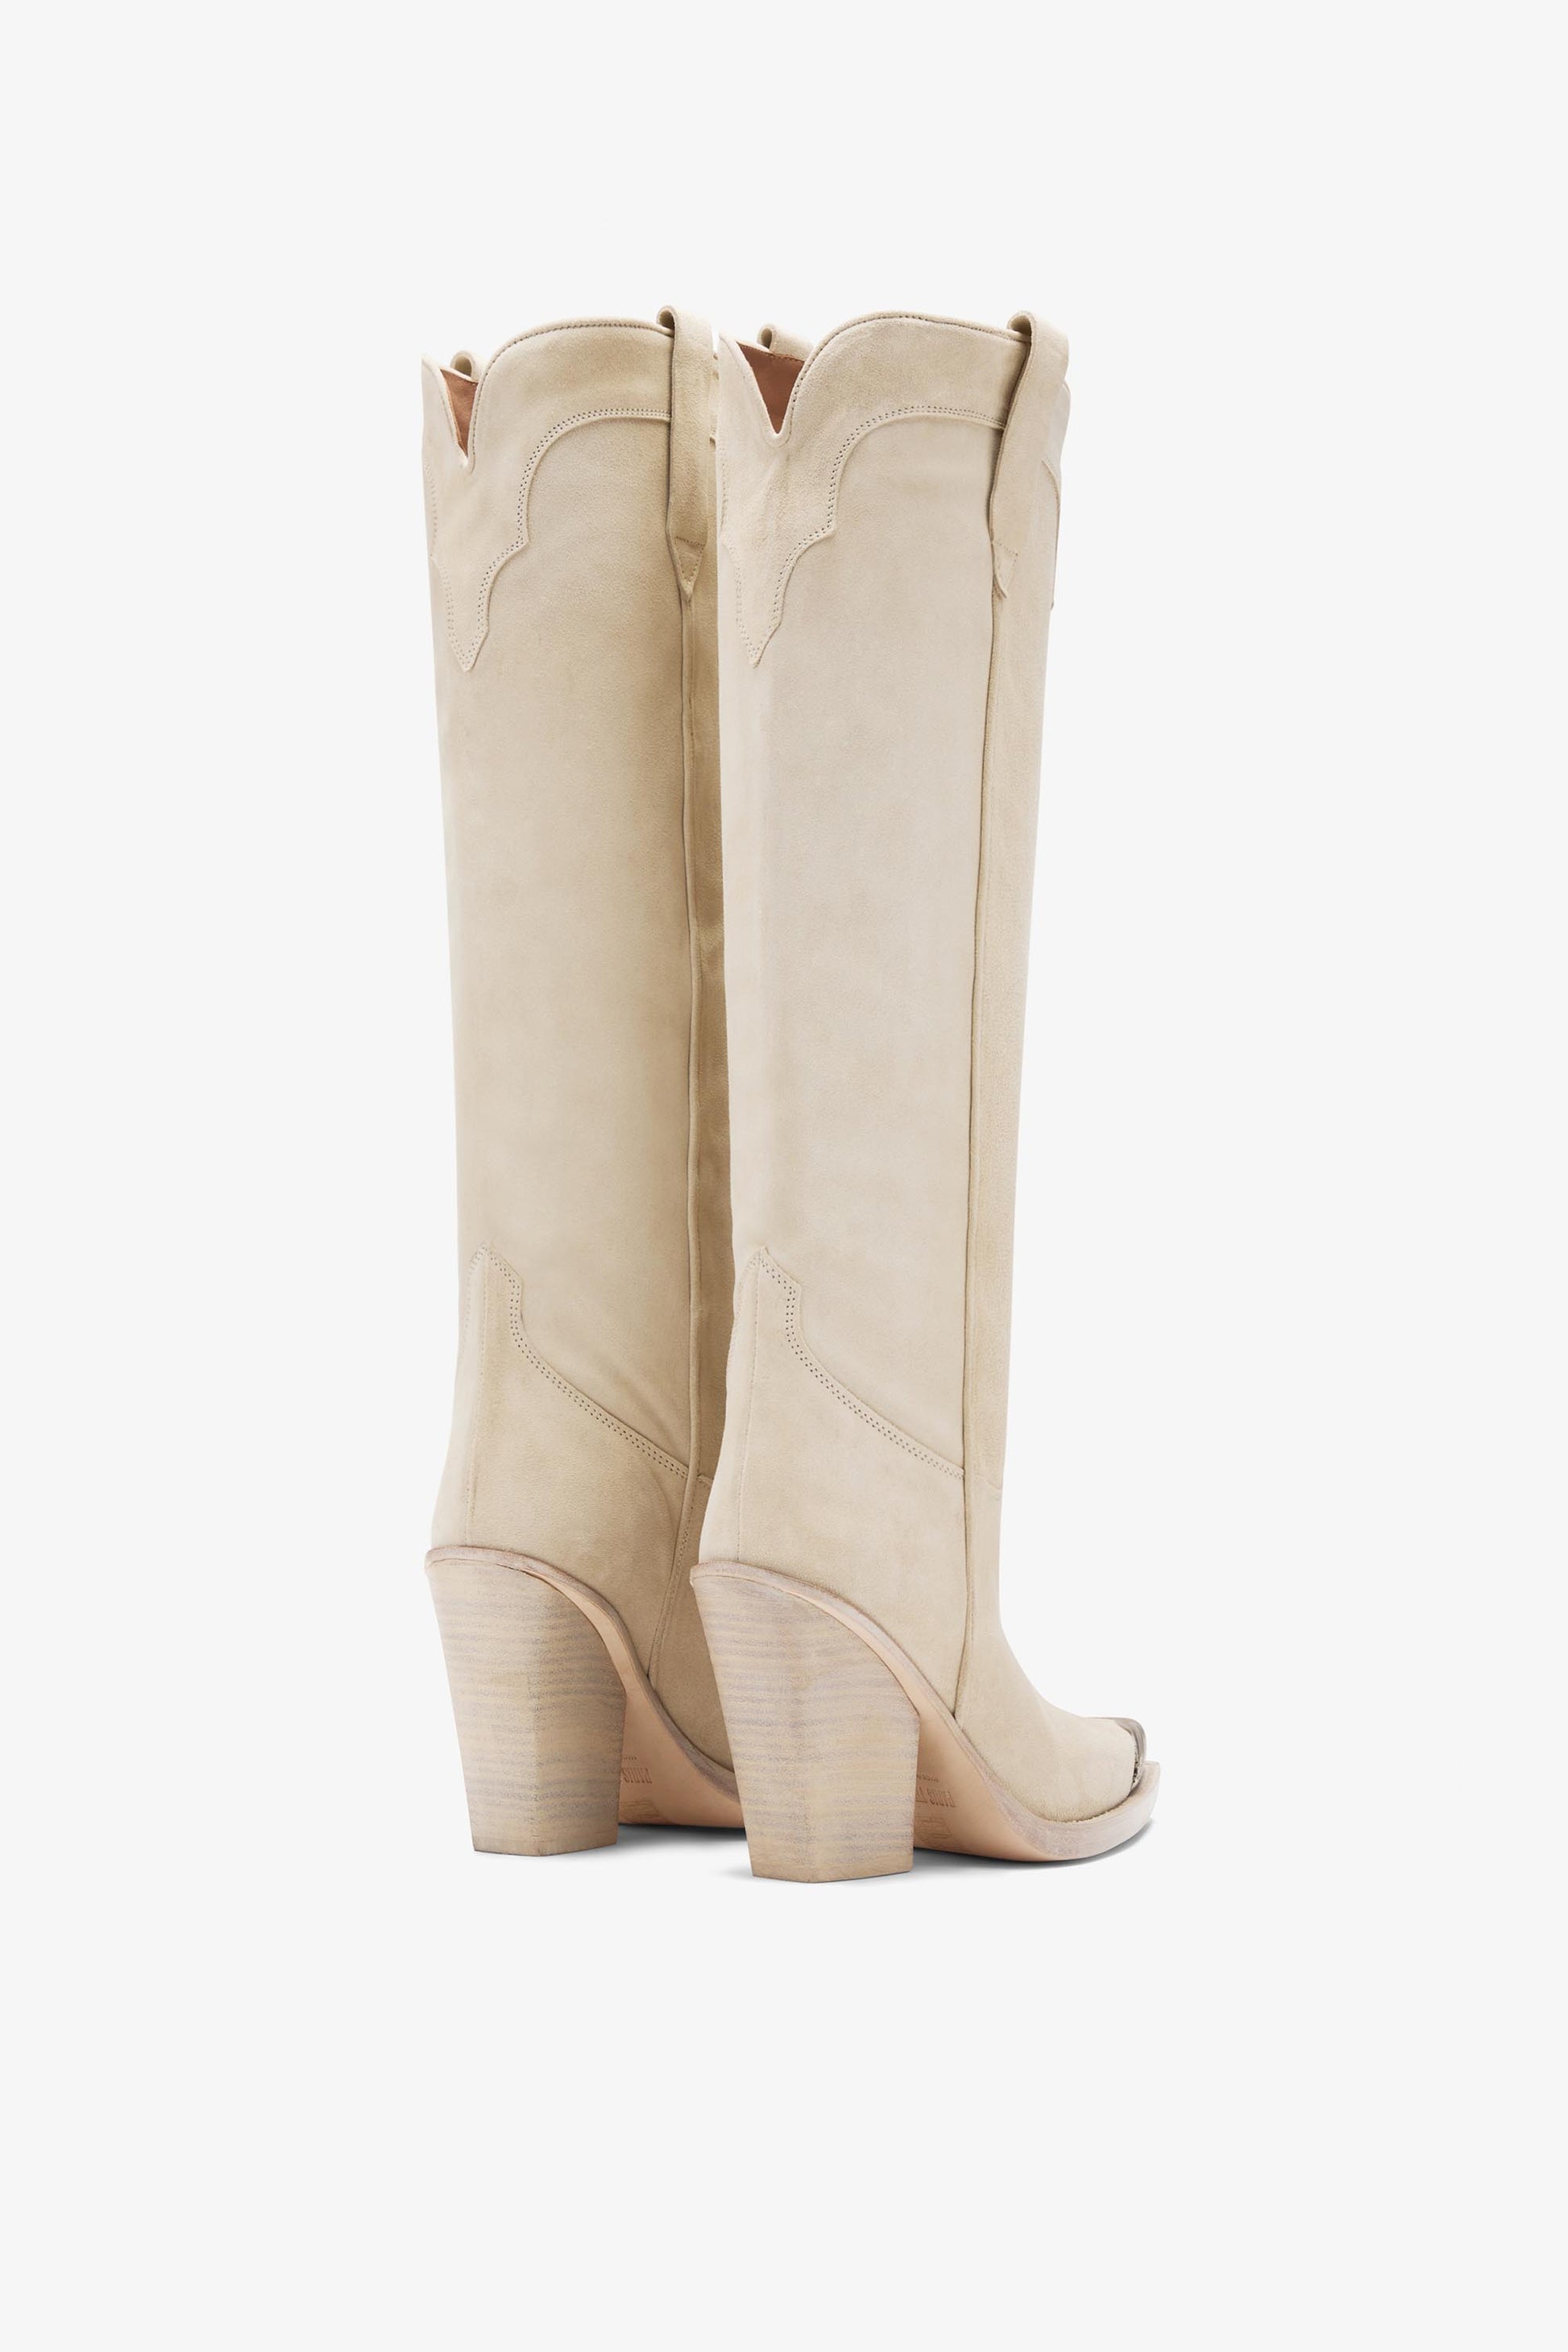 Off white calf suede boots with metallic toe